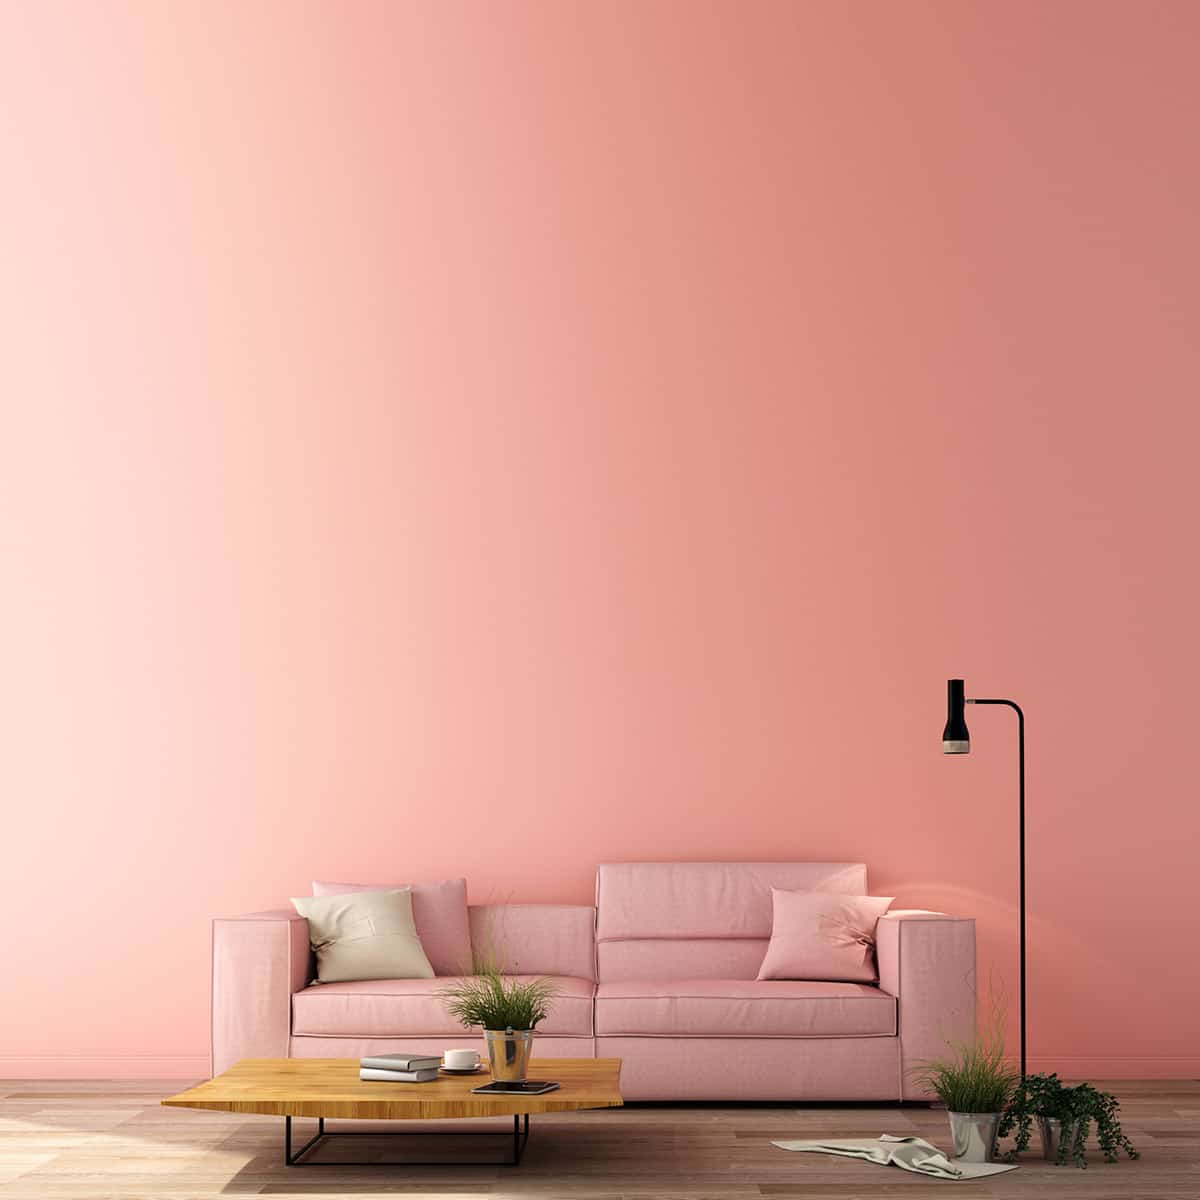 Coral Pink Wall with a Green Carpet